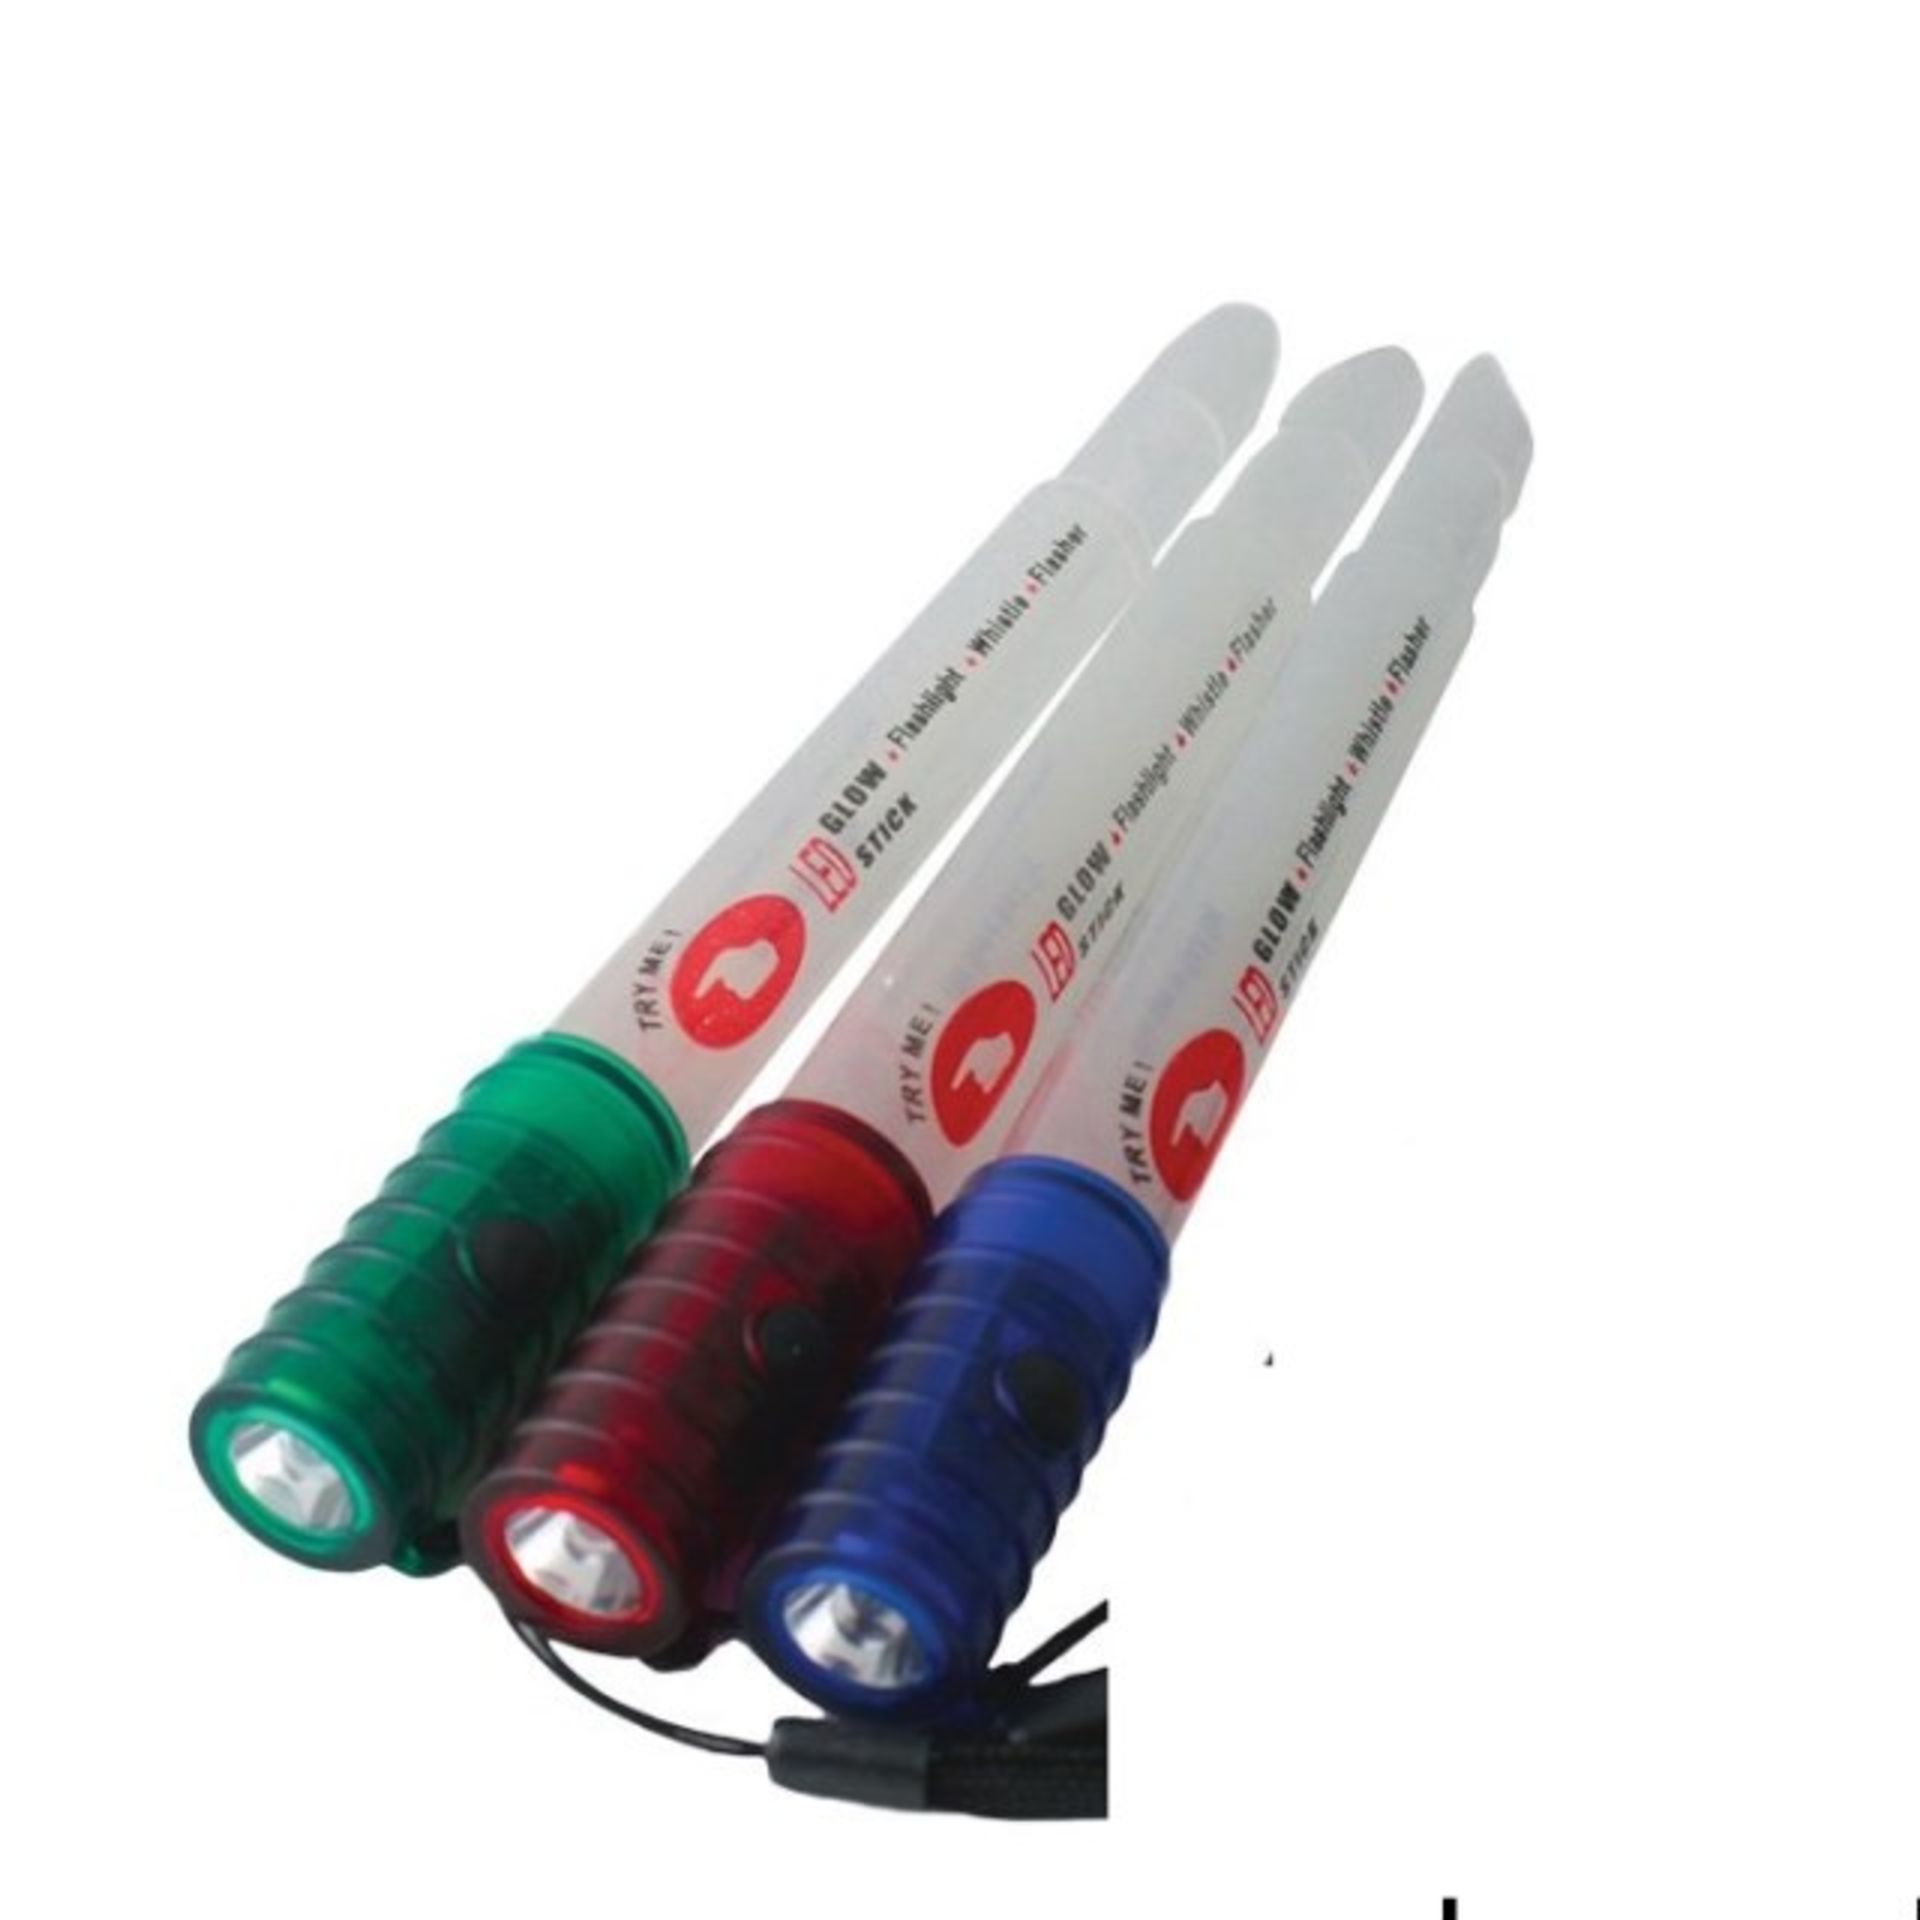 V Brand New Three LED Glowstick Torches With Emergency Whistle and 3 Light Settings Includes